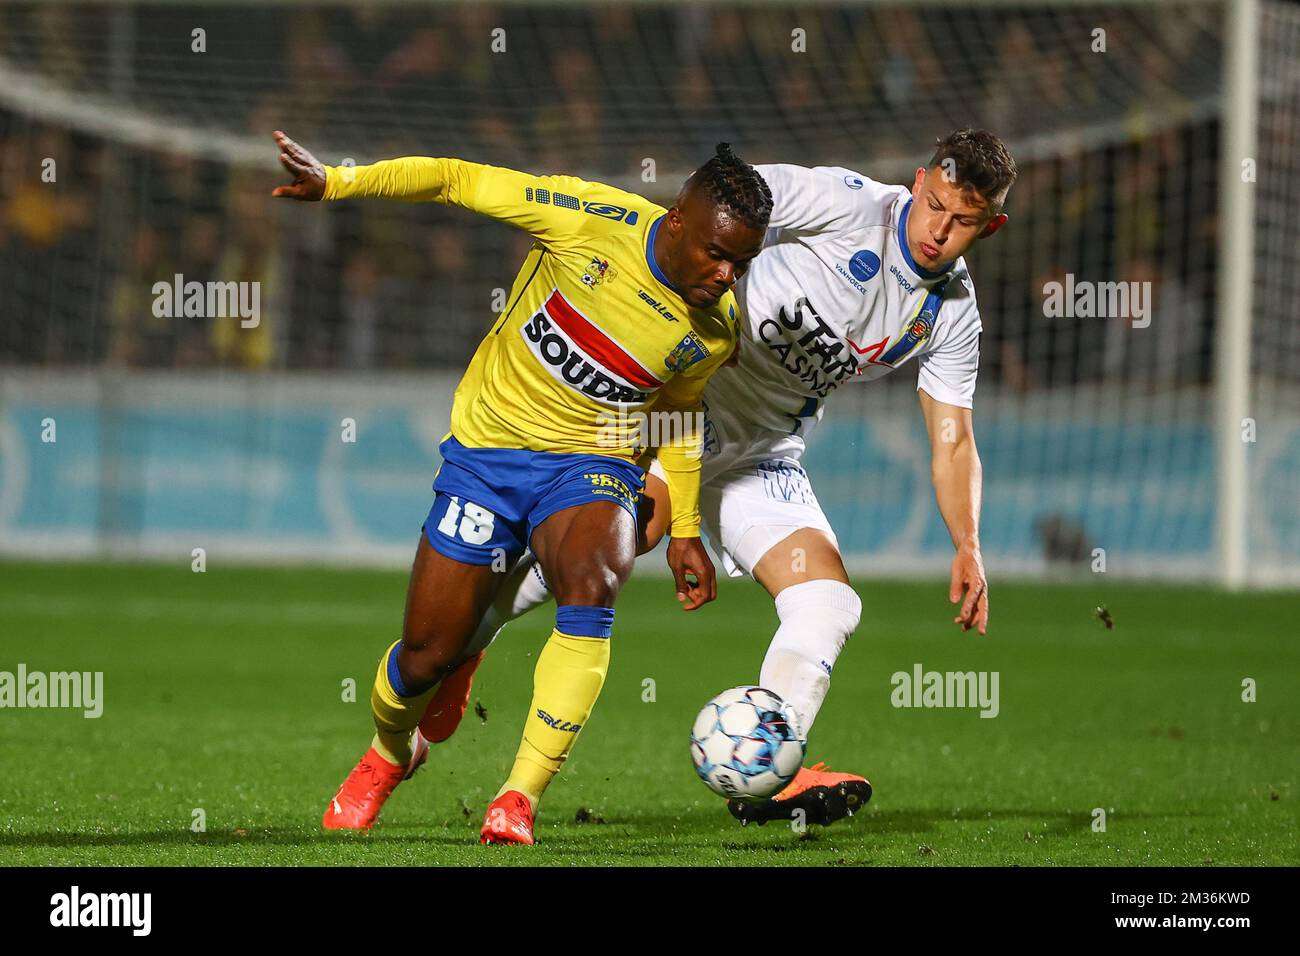 Westerlo's Kouya Mabea and Waasland-Beveren's Jenthe Mertens fight for the ball during a soccer match between Westerlo and Waasland Beveren, Sunday 07 November 2021 in Westerlo, on day 11 of the 'D1B Pro League' second division of the Belgian soccer championship. BELGA PHOTO DAVID PINTENS Stock Photo